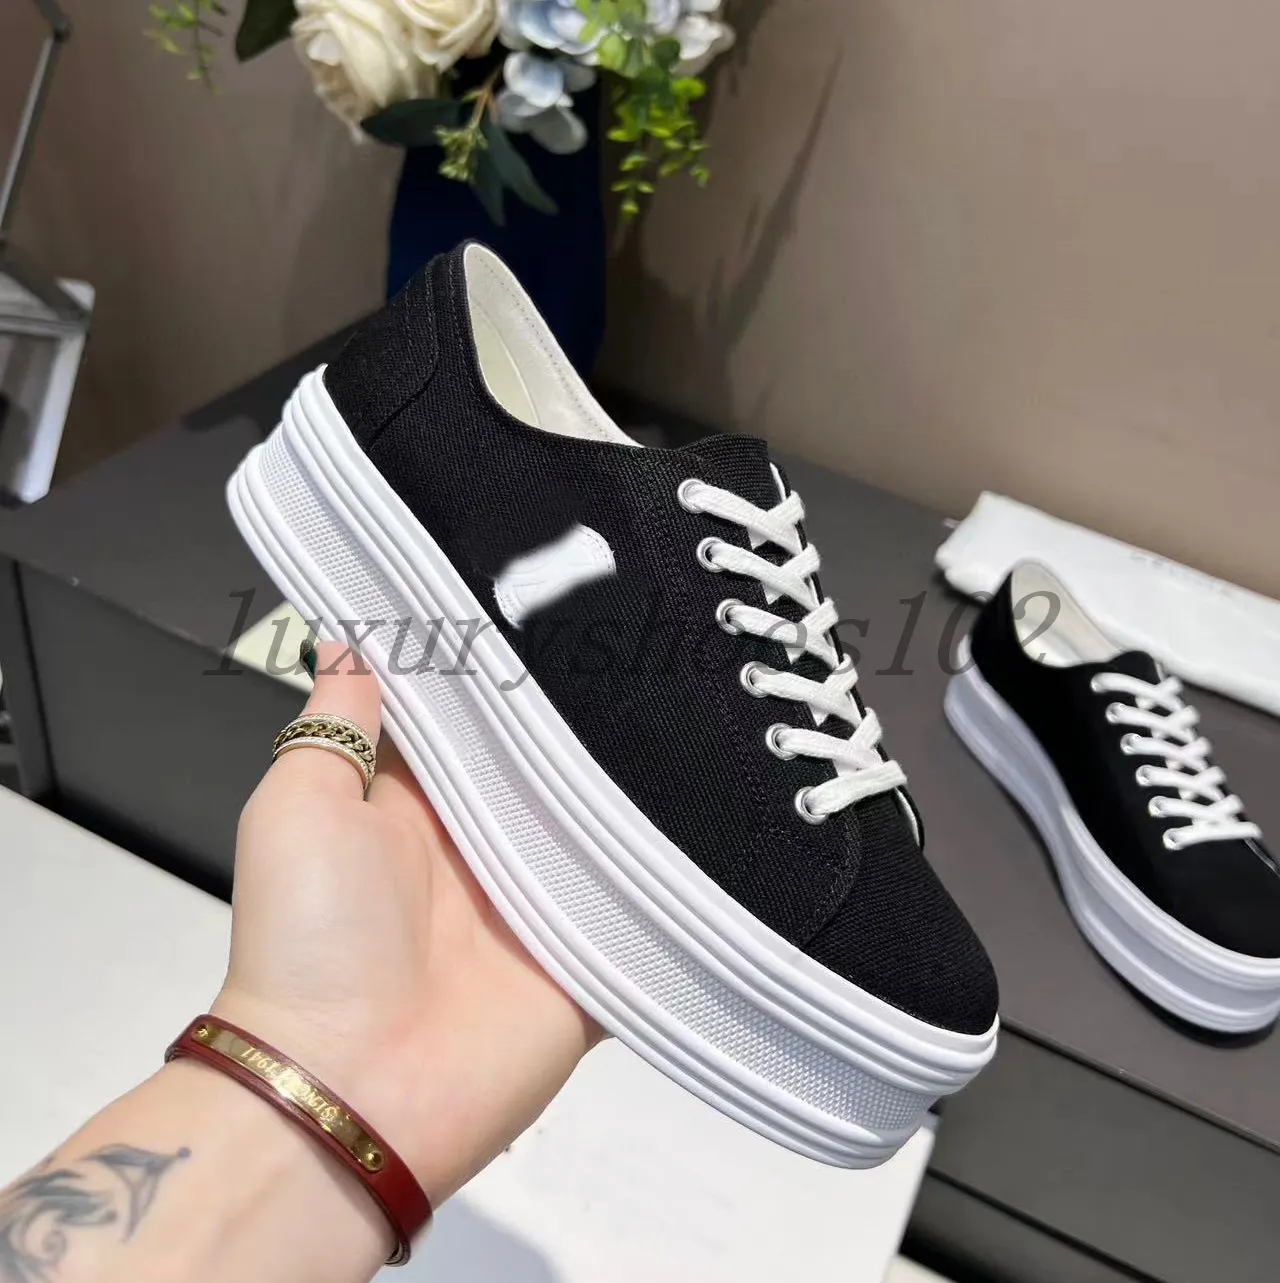 Designer Casual Shoes JANE TRIOMPHE Sneakers Women Low-cut Platform Sneaker Canvas Cowhide Leather High Top Rubber Outsole Shoes